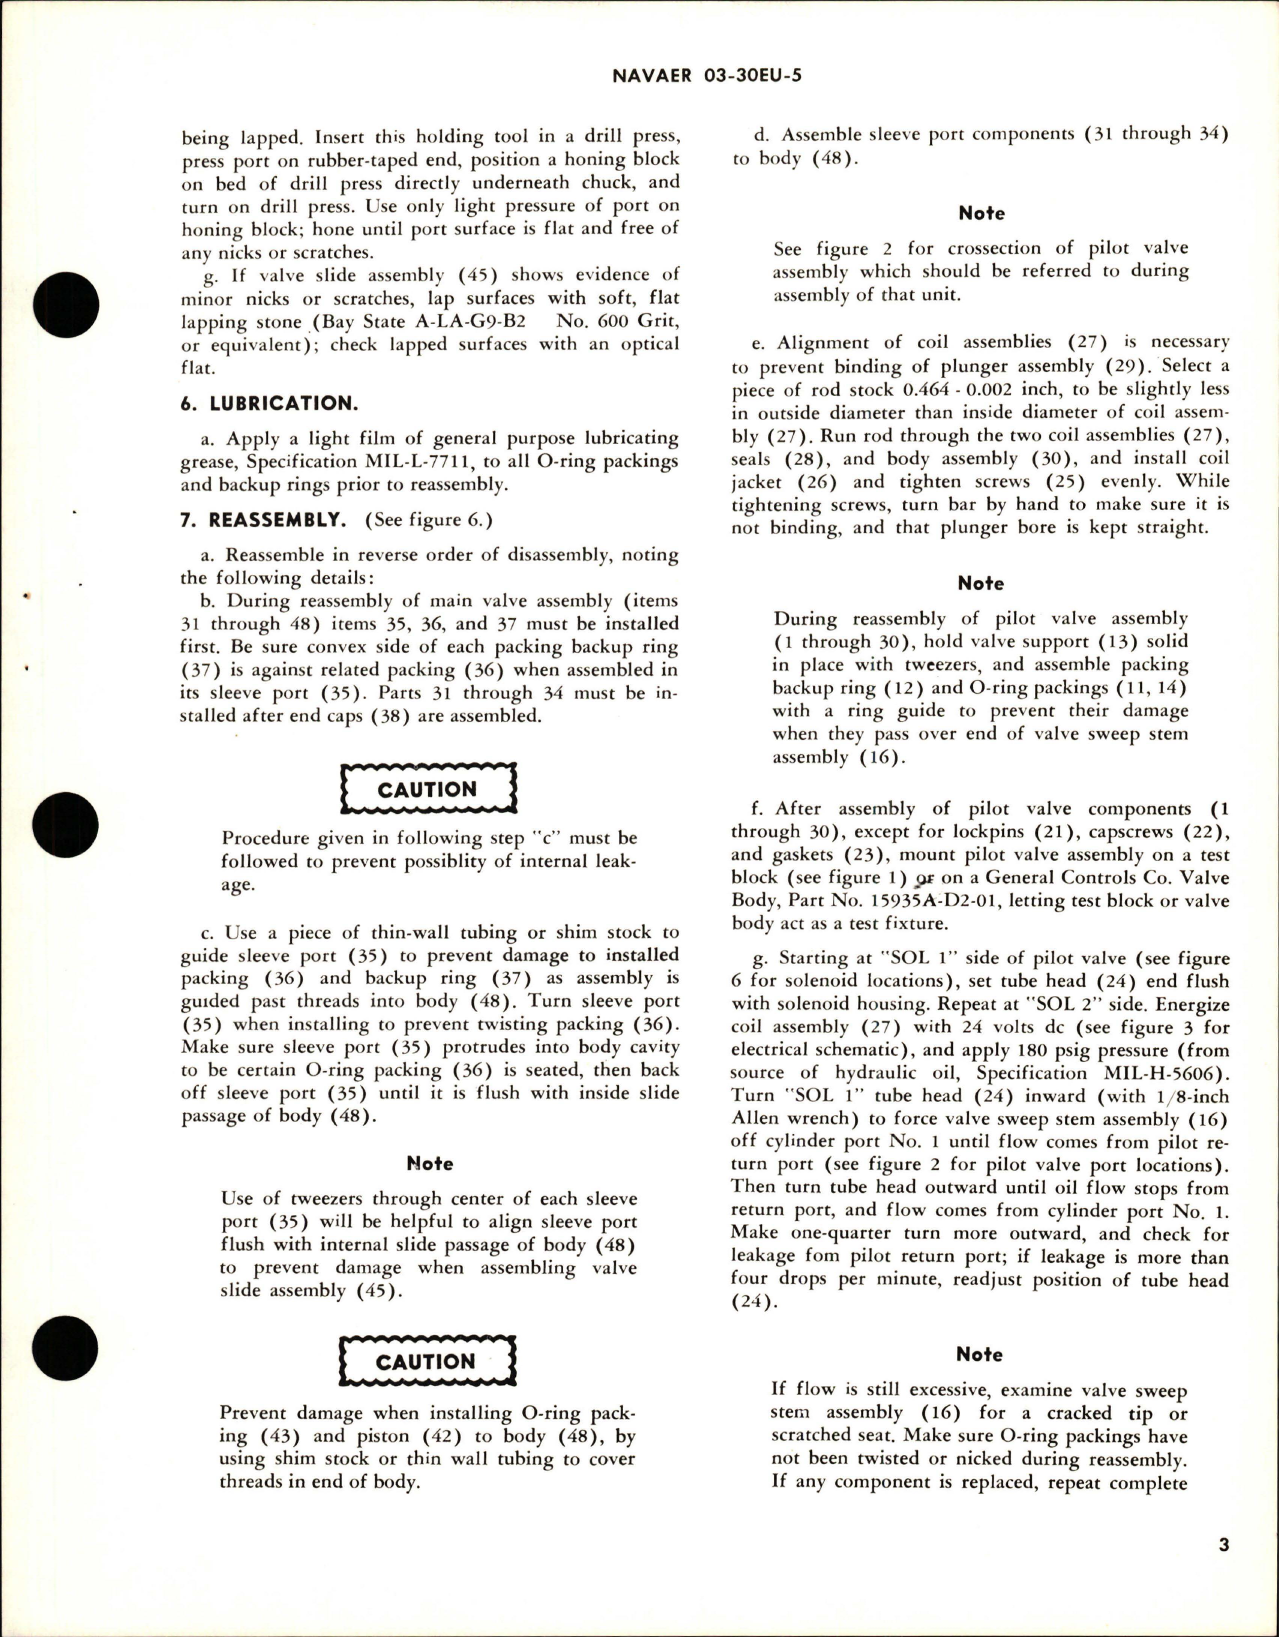 Sample page 5 from AirCorps Library document: Overhaul Instructions with Parts Breakdown for Pilot Operated 4-Way Selector Valve Assembly - Parts AV14B1139 and AV14C1164 